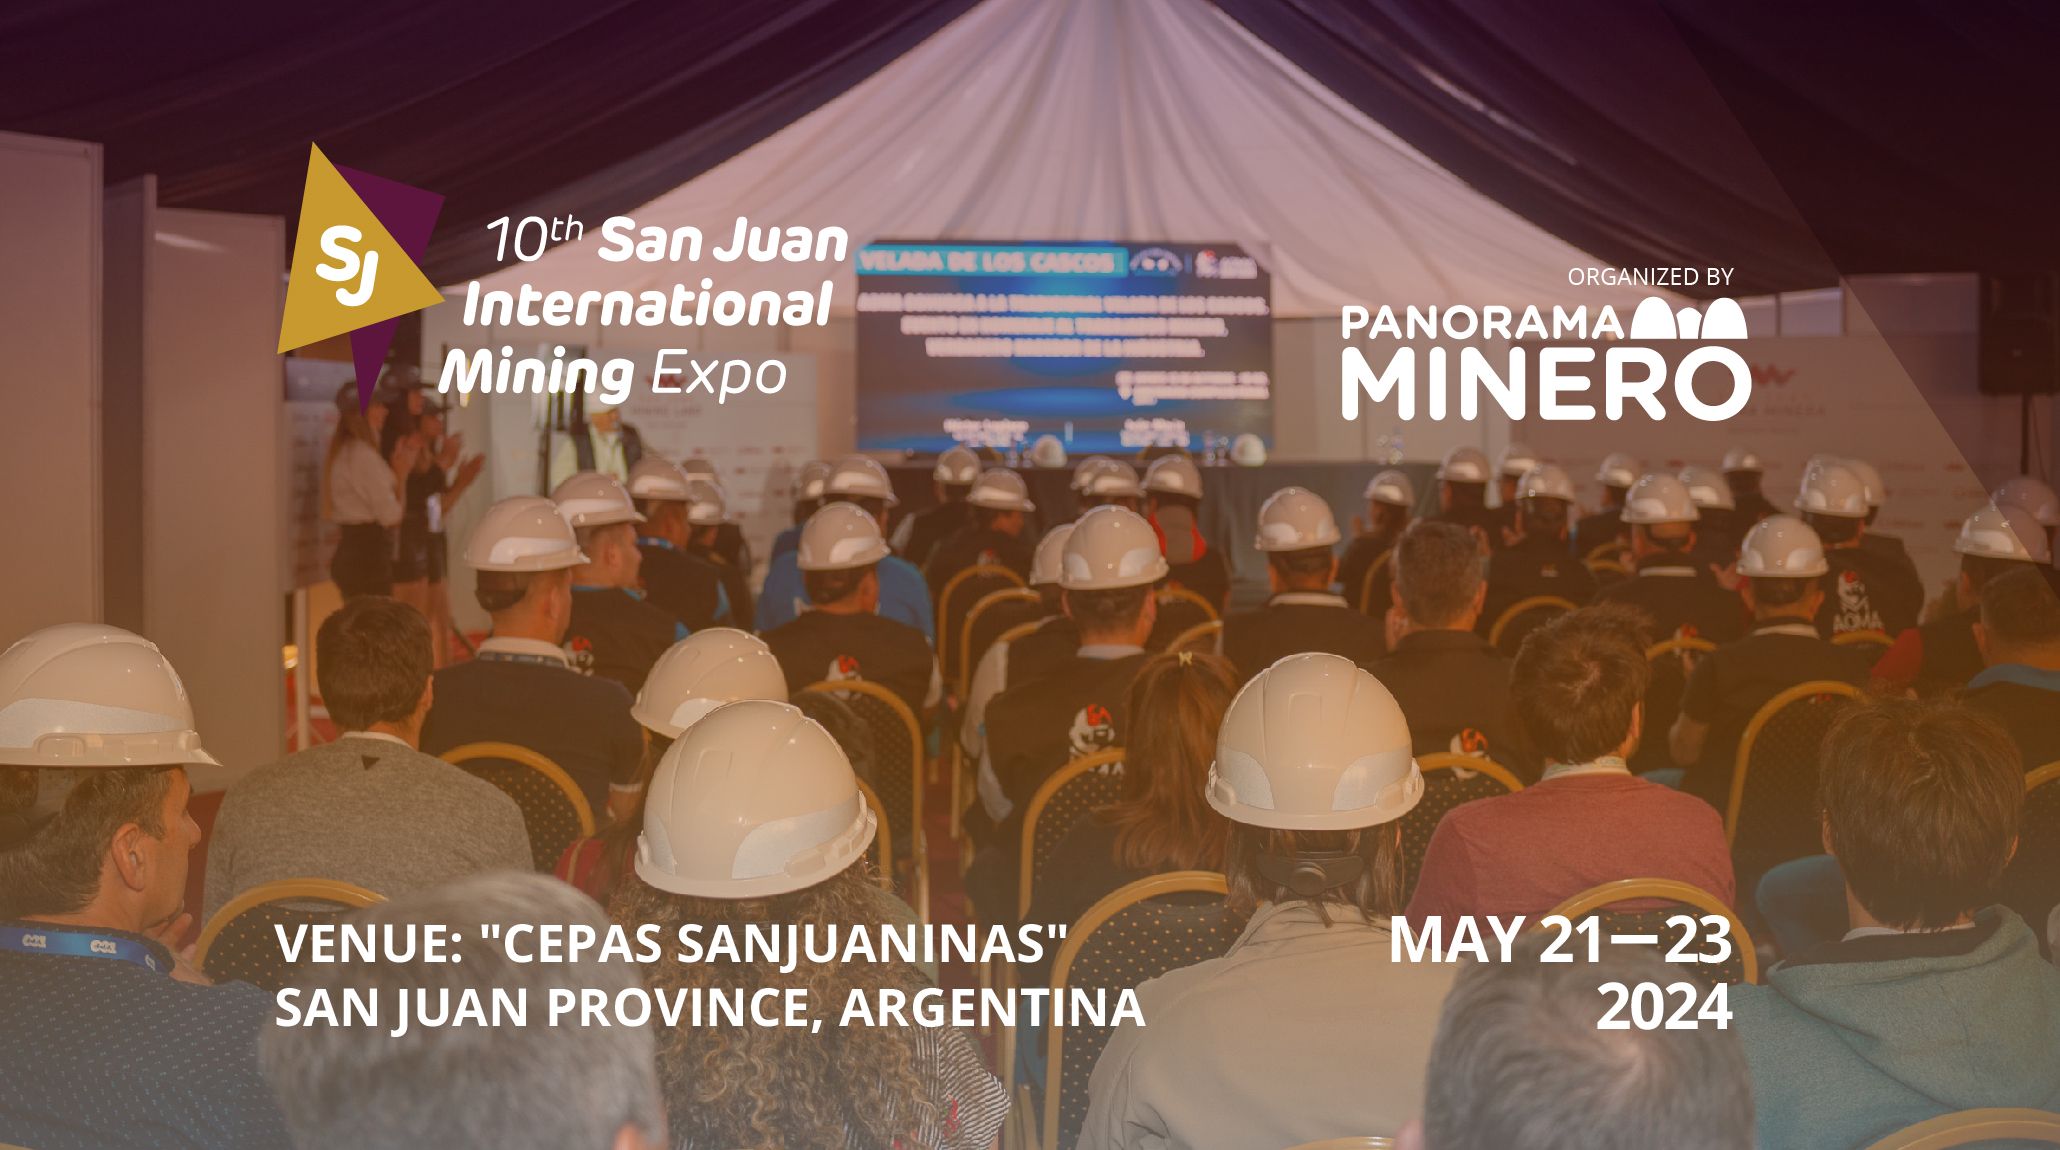 Six Governors, the New Secretary of Mining and over 300 companies to attend “San Juan International Mining Expo 2024”